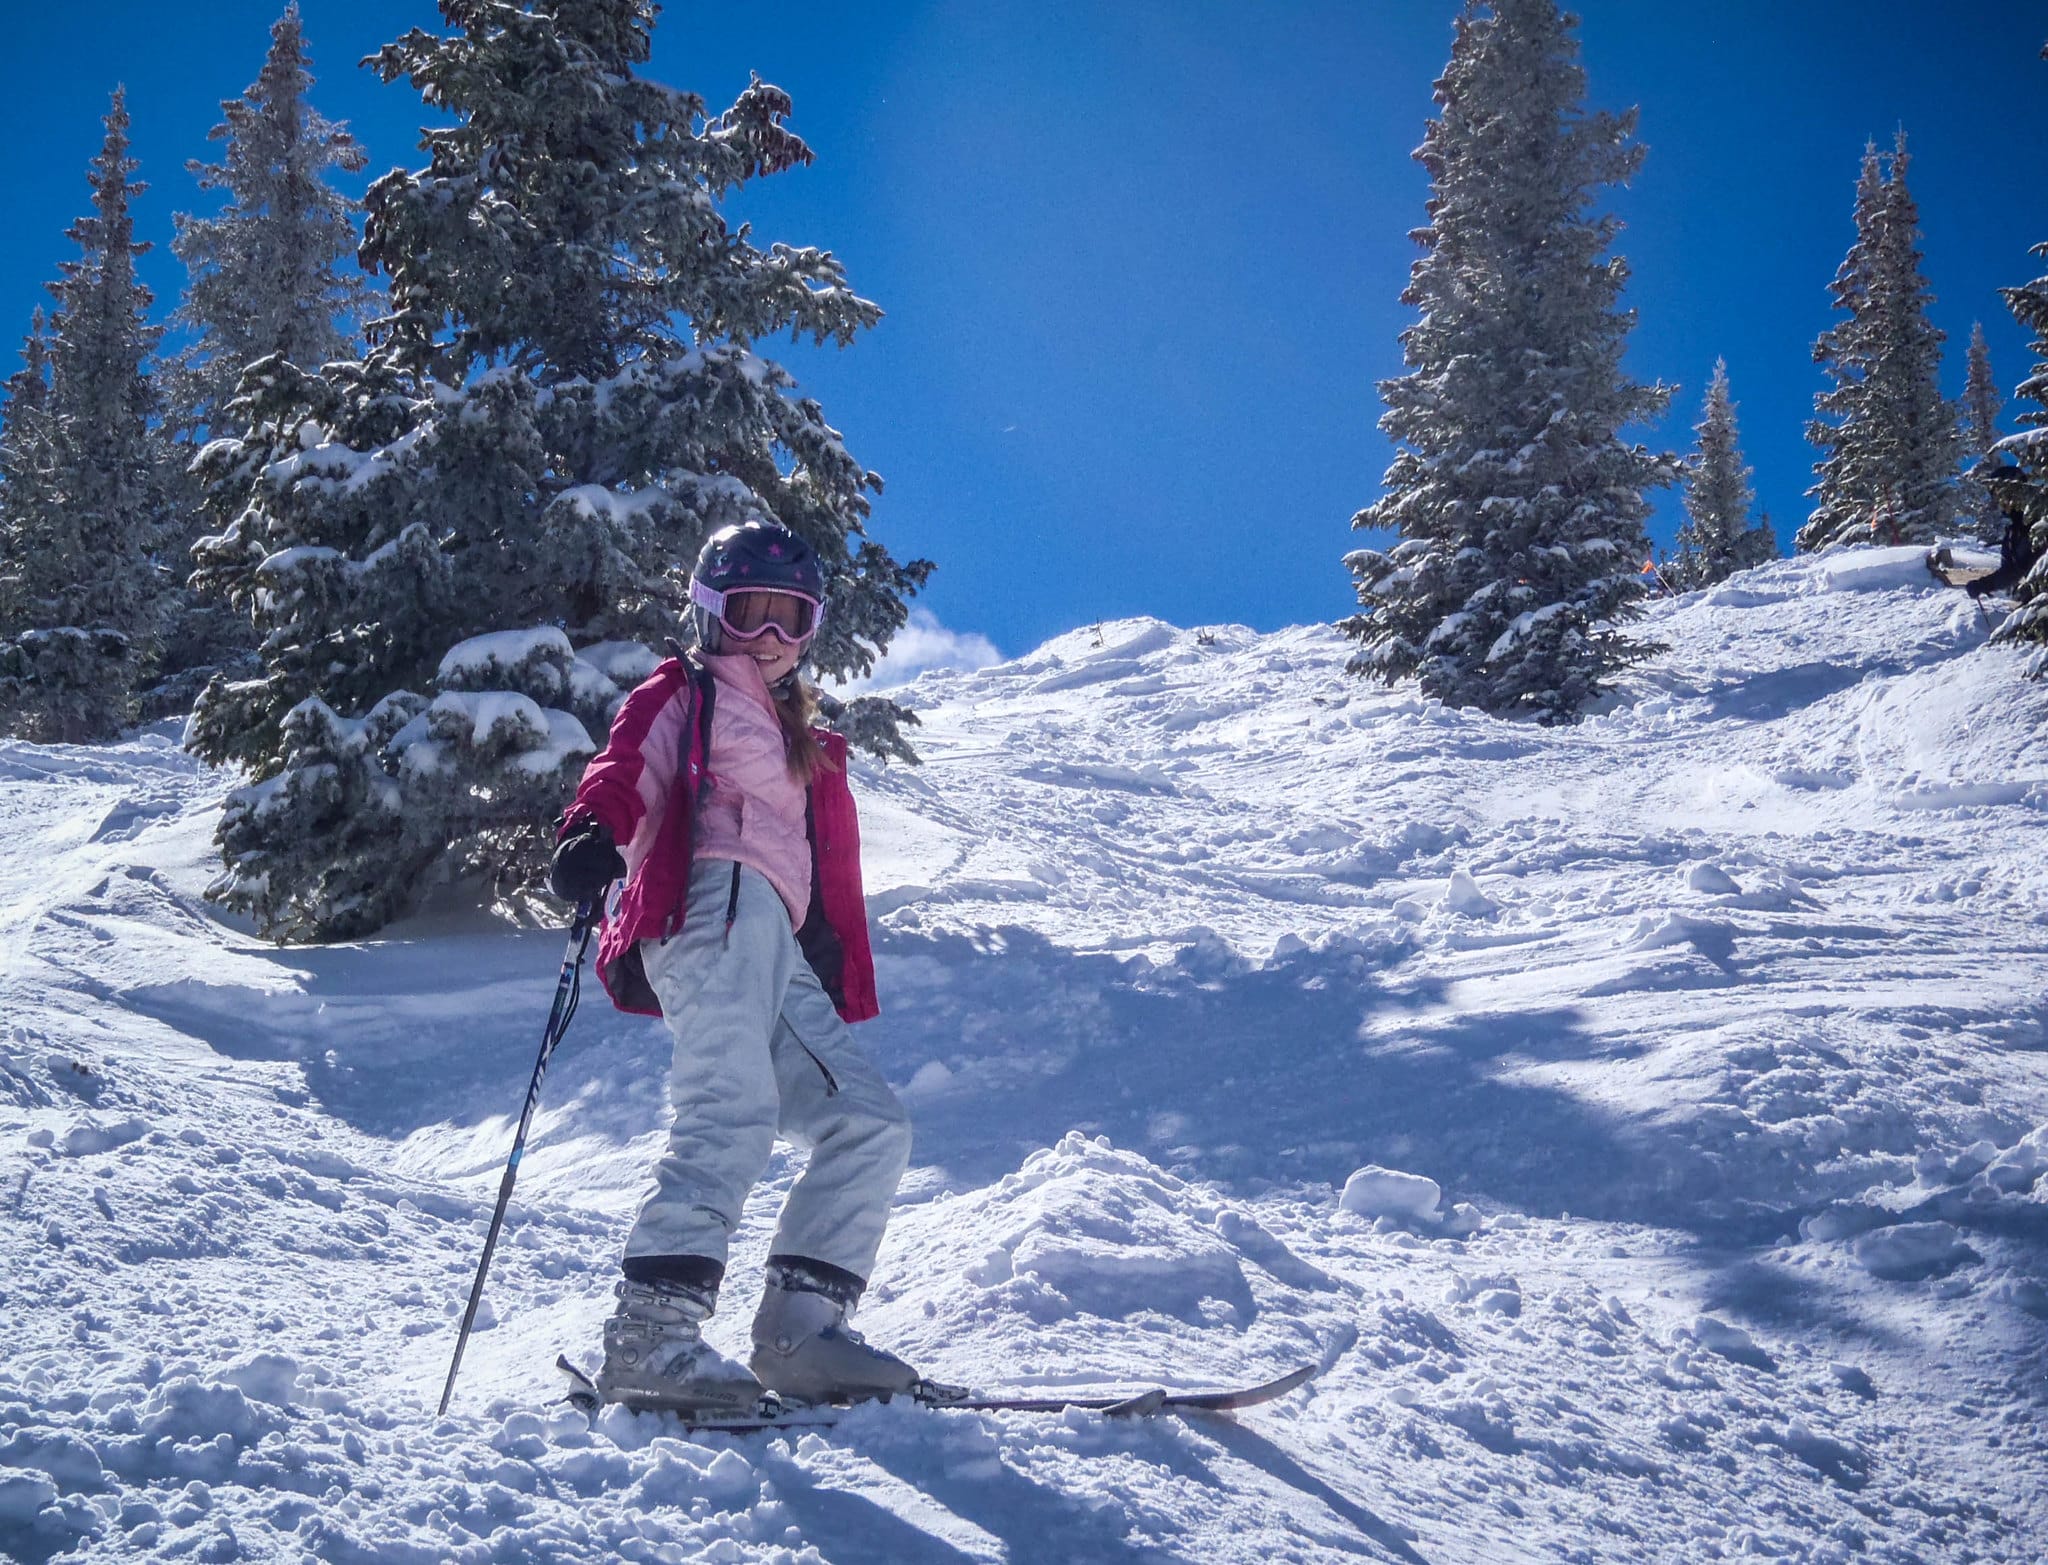 Person in a pink ski jacket and white pants standing on the side of a snowy Breckenridge hill on skis, smiling